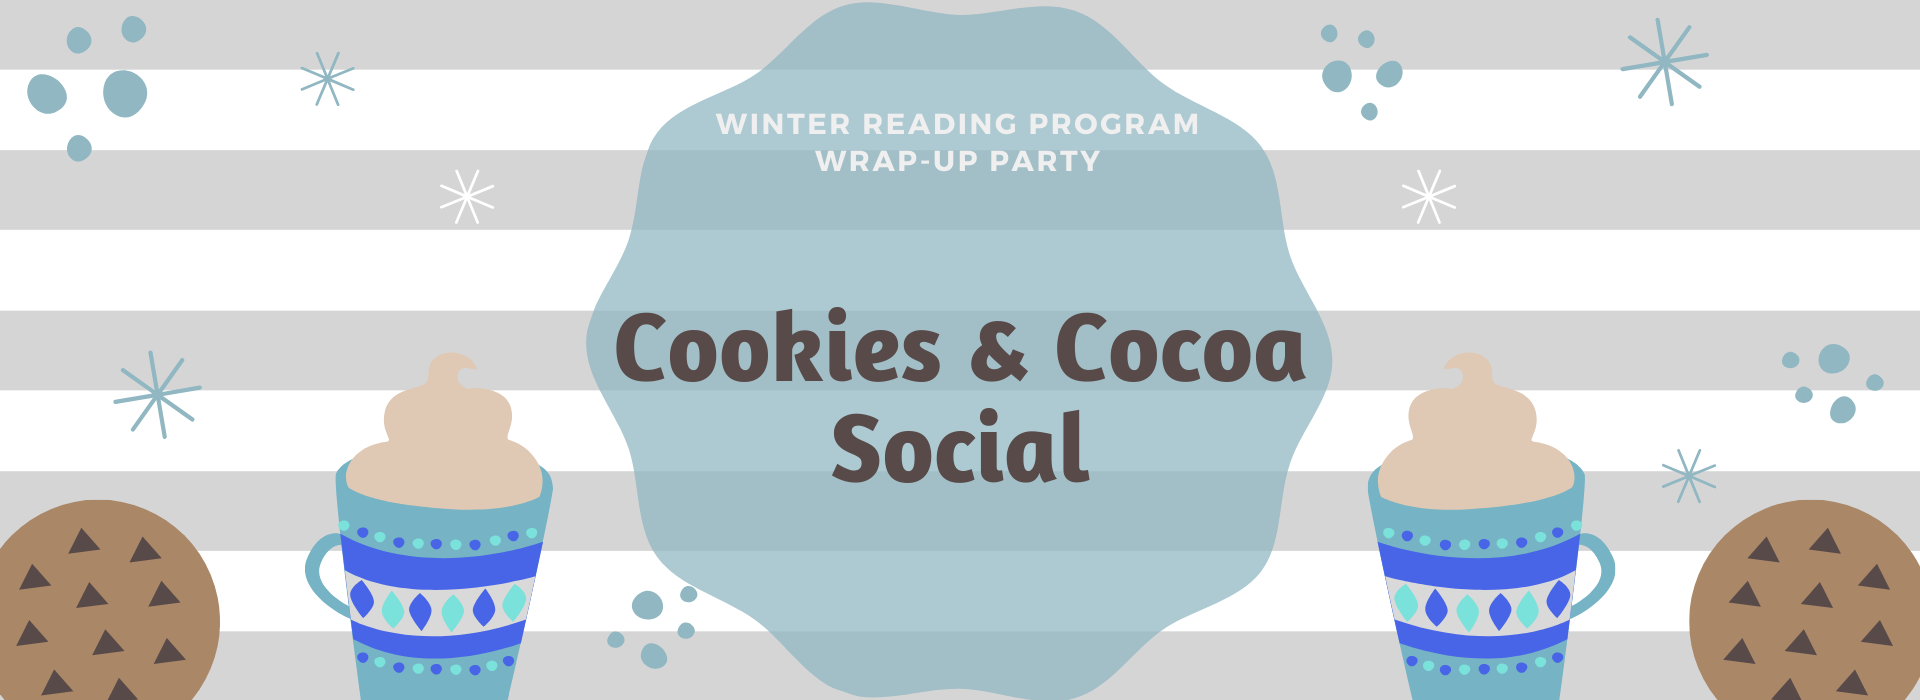 Cookies & Cocoa Social on March 8th from 2pm to 4pm